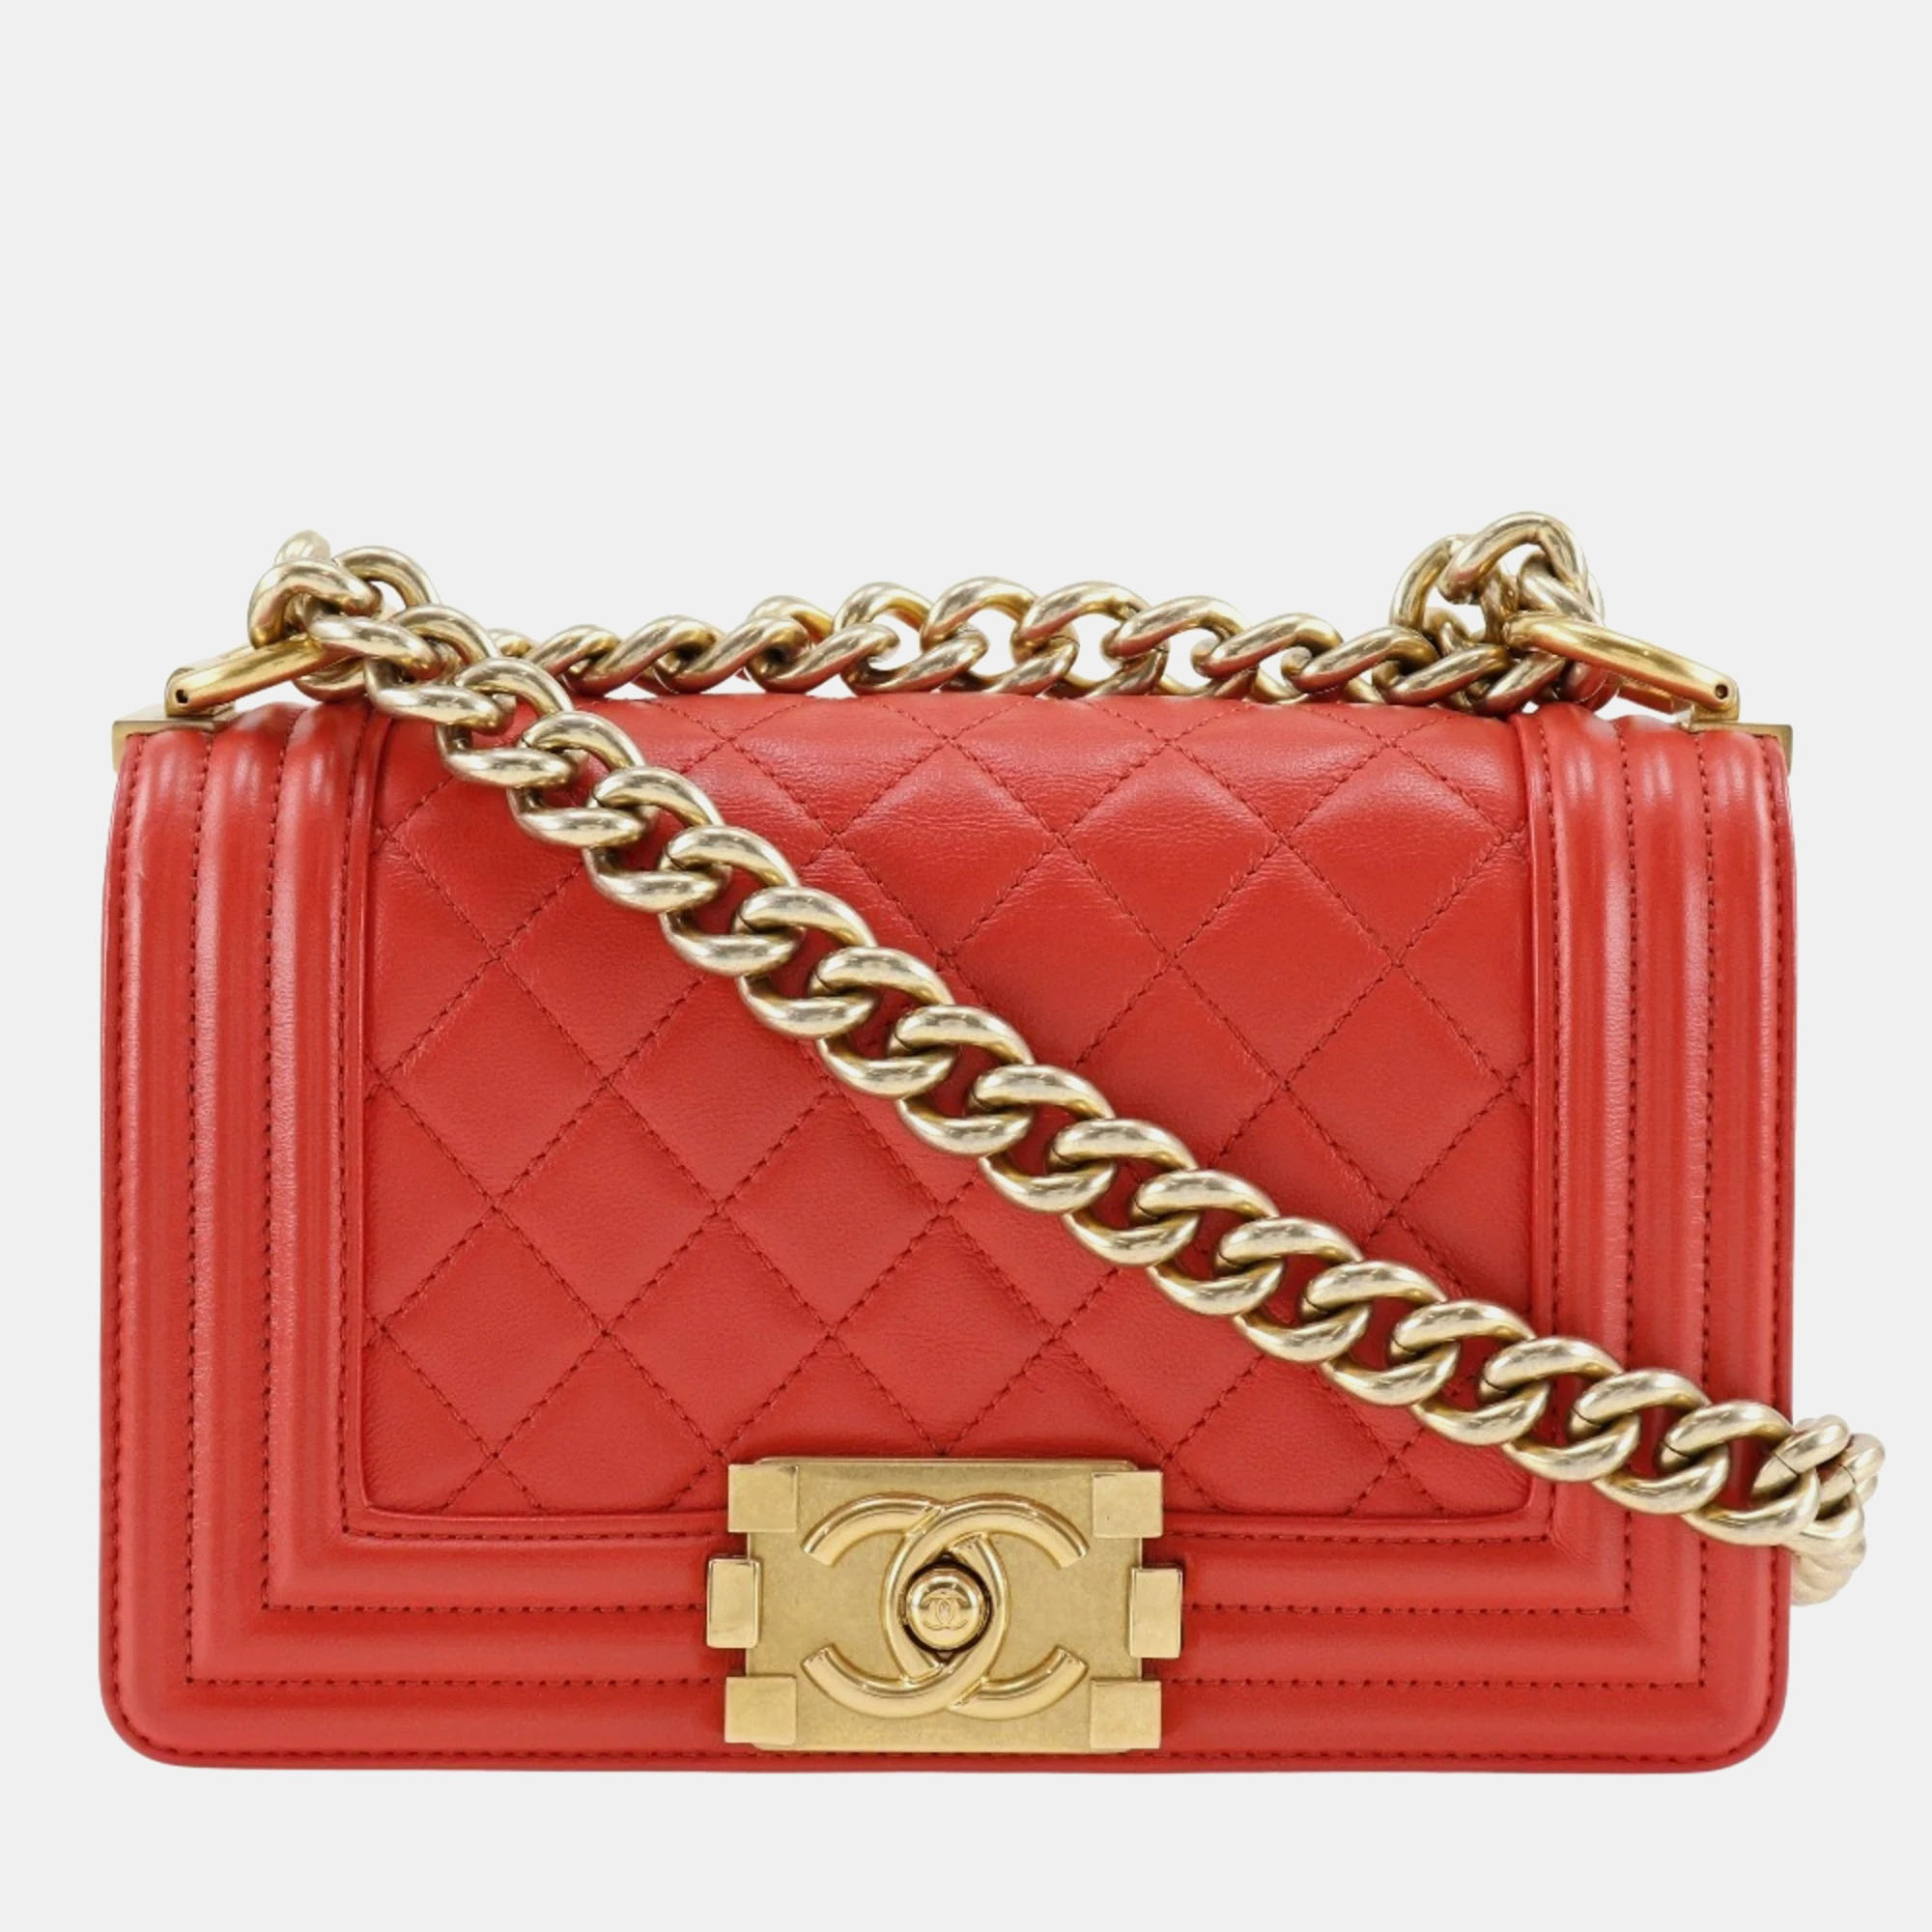 Chanel red leather small boy shoulder bag